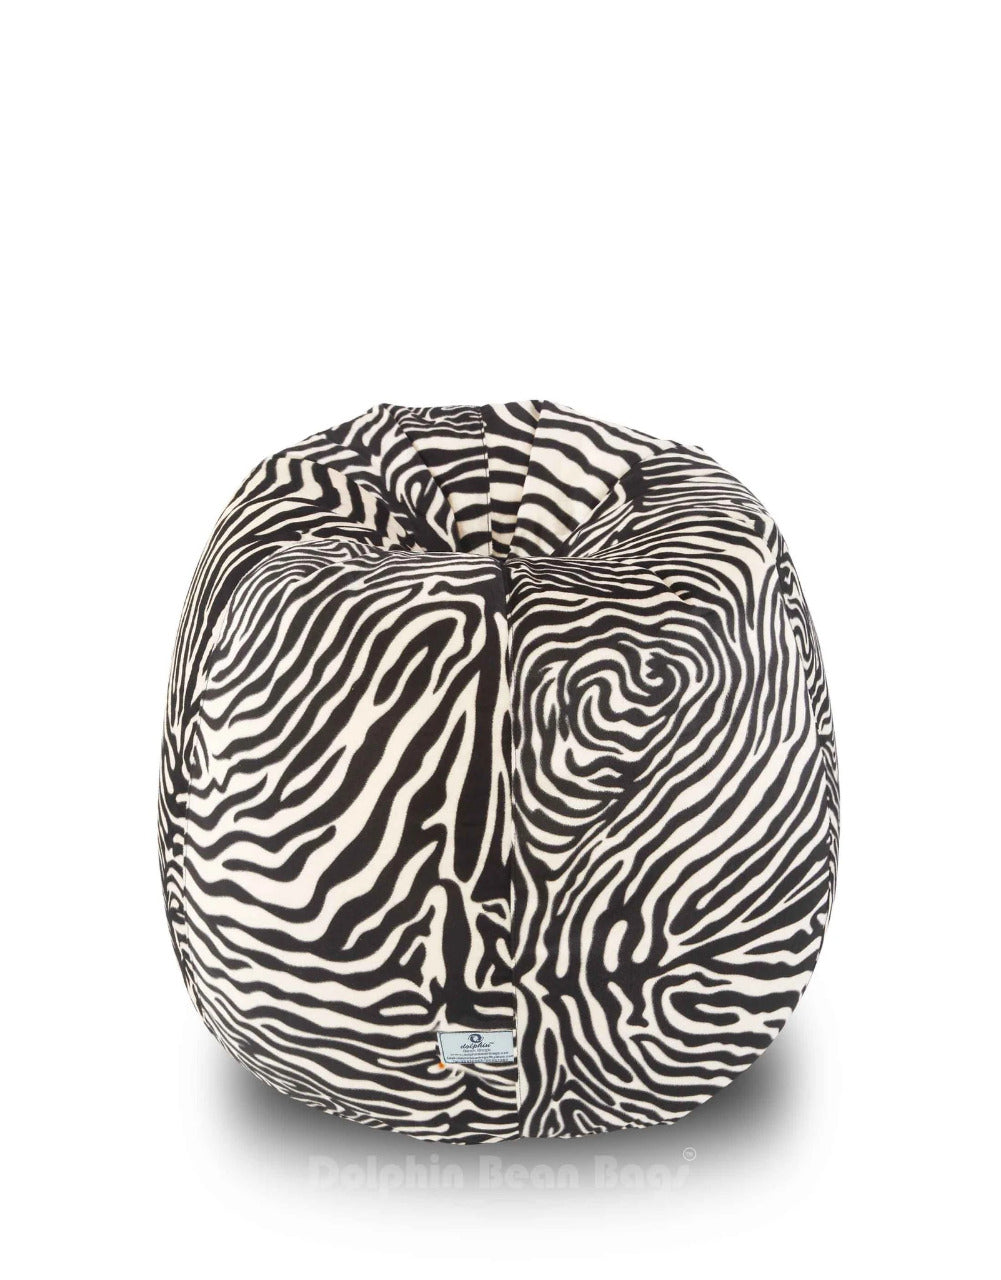 Bean Bag : XL Blk-White-ZEBRA-FABRIC-FILLED & WASHABLE (with Beans)